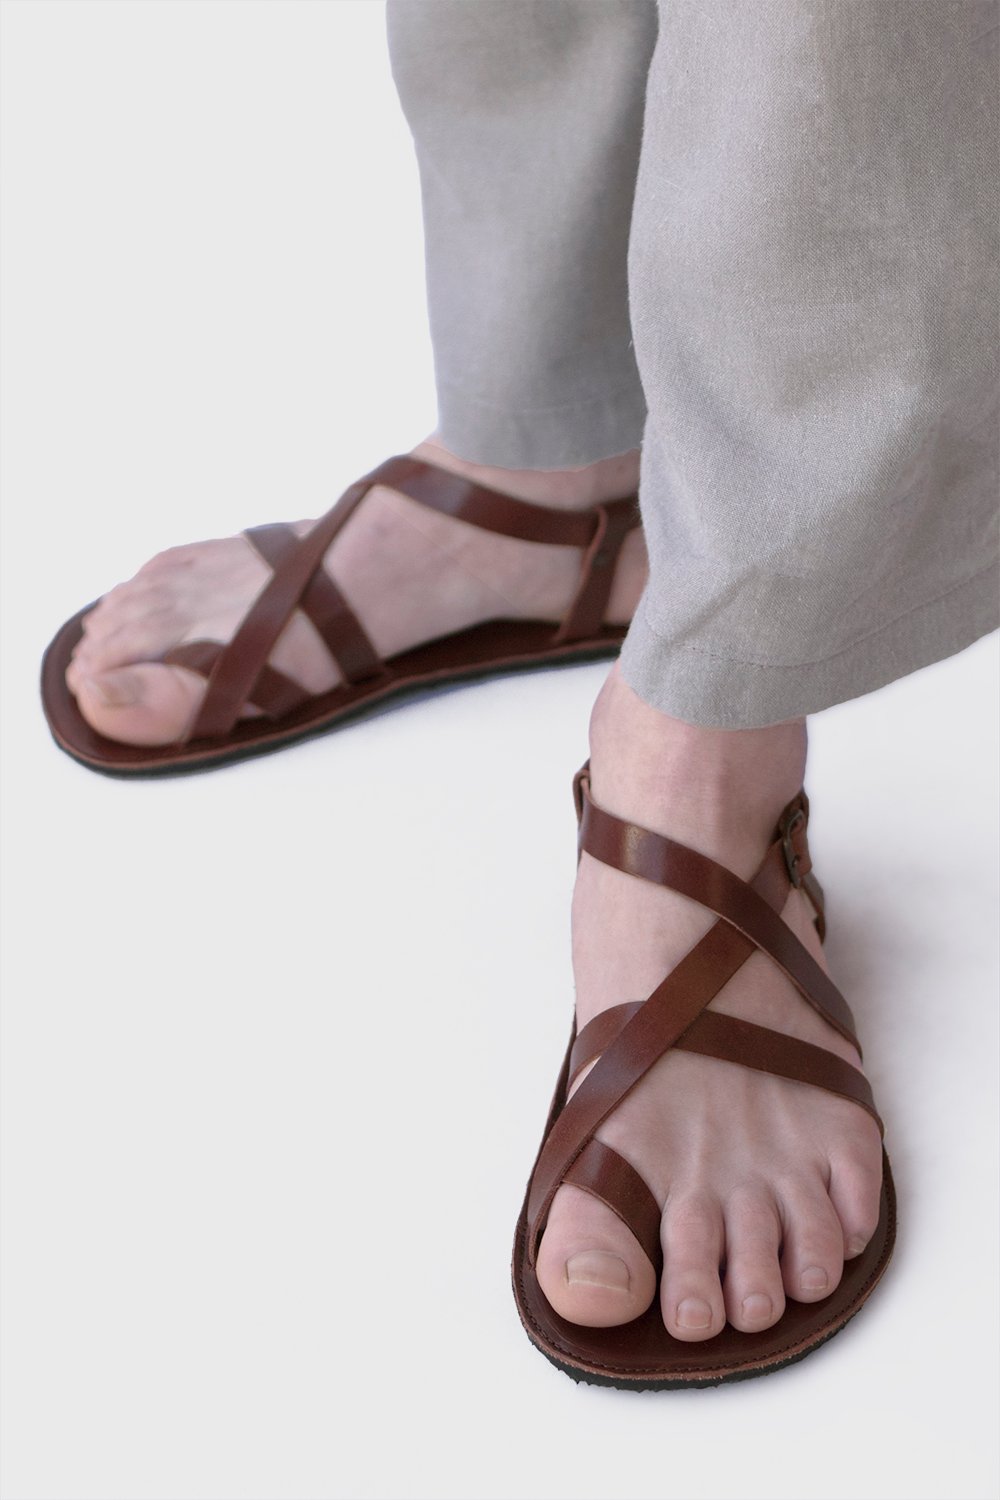 Sandals  The Drifter Leather handmade shoes